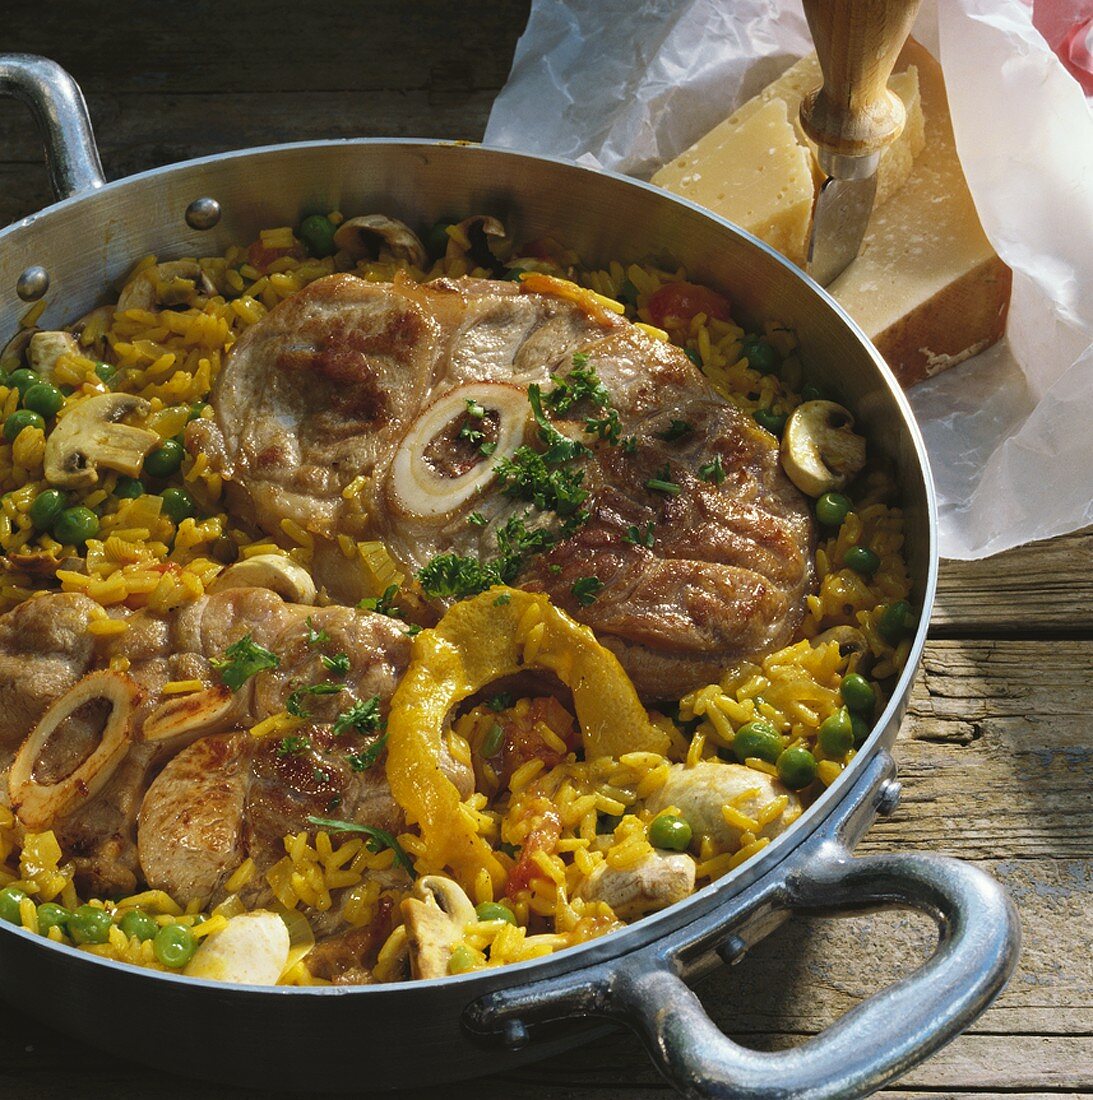 Braised slices of lamb shank with saffron vegetable rice